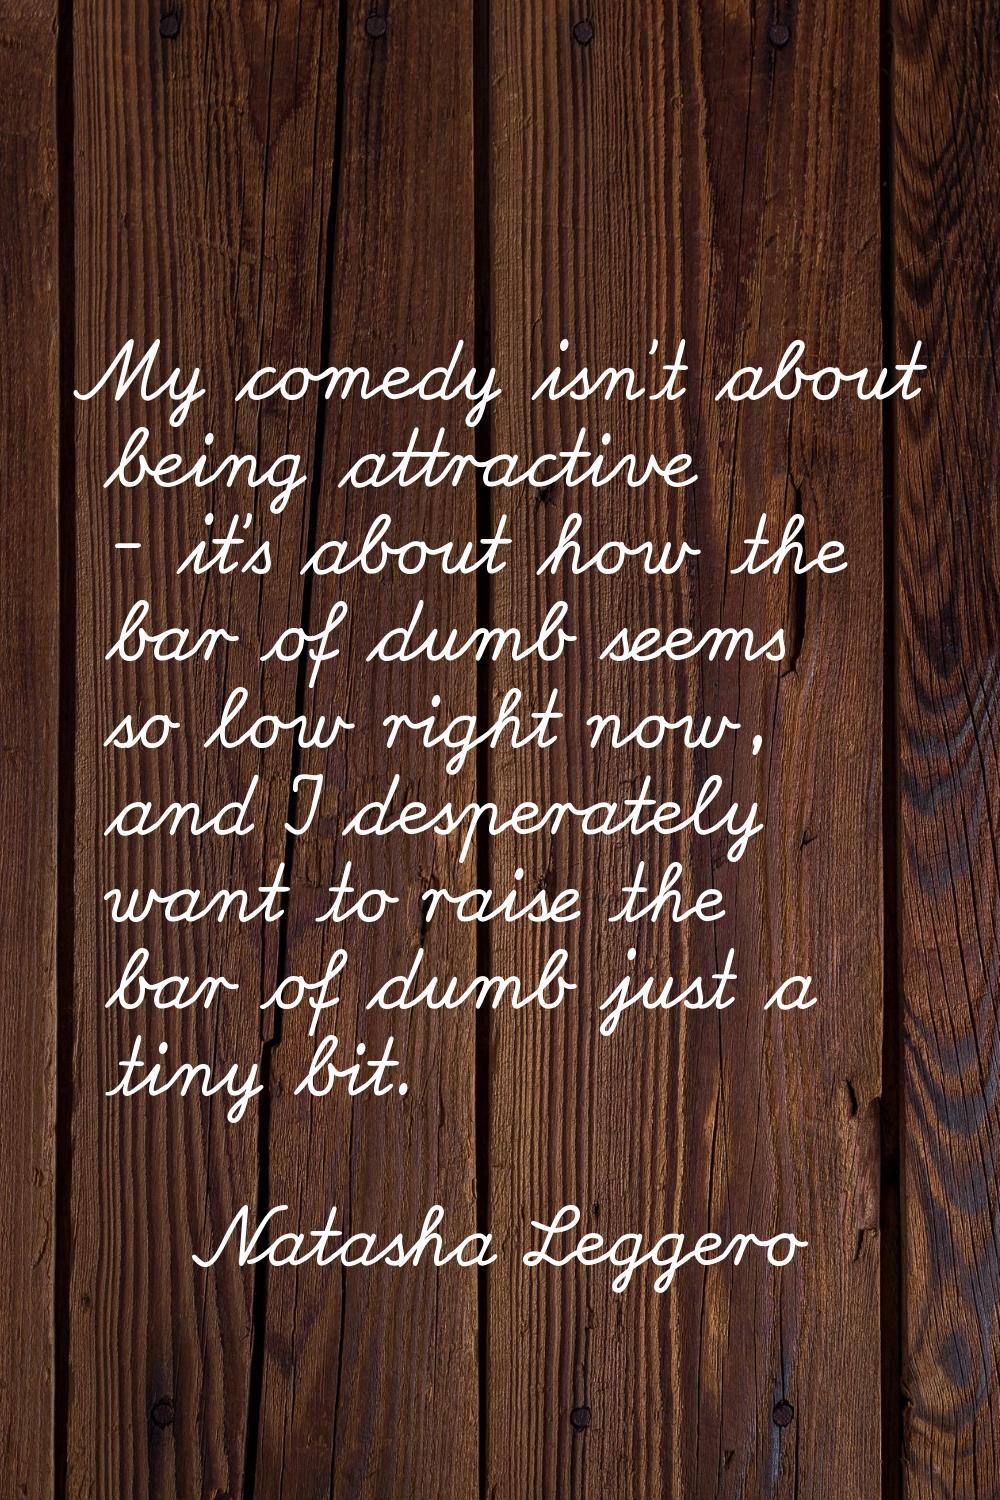 My comedy isn't about being attractive - it's about how the bar of dumb seems so low right now, and